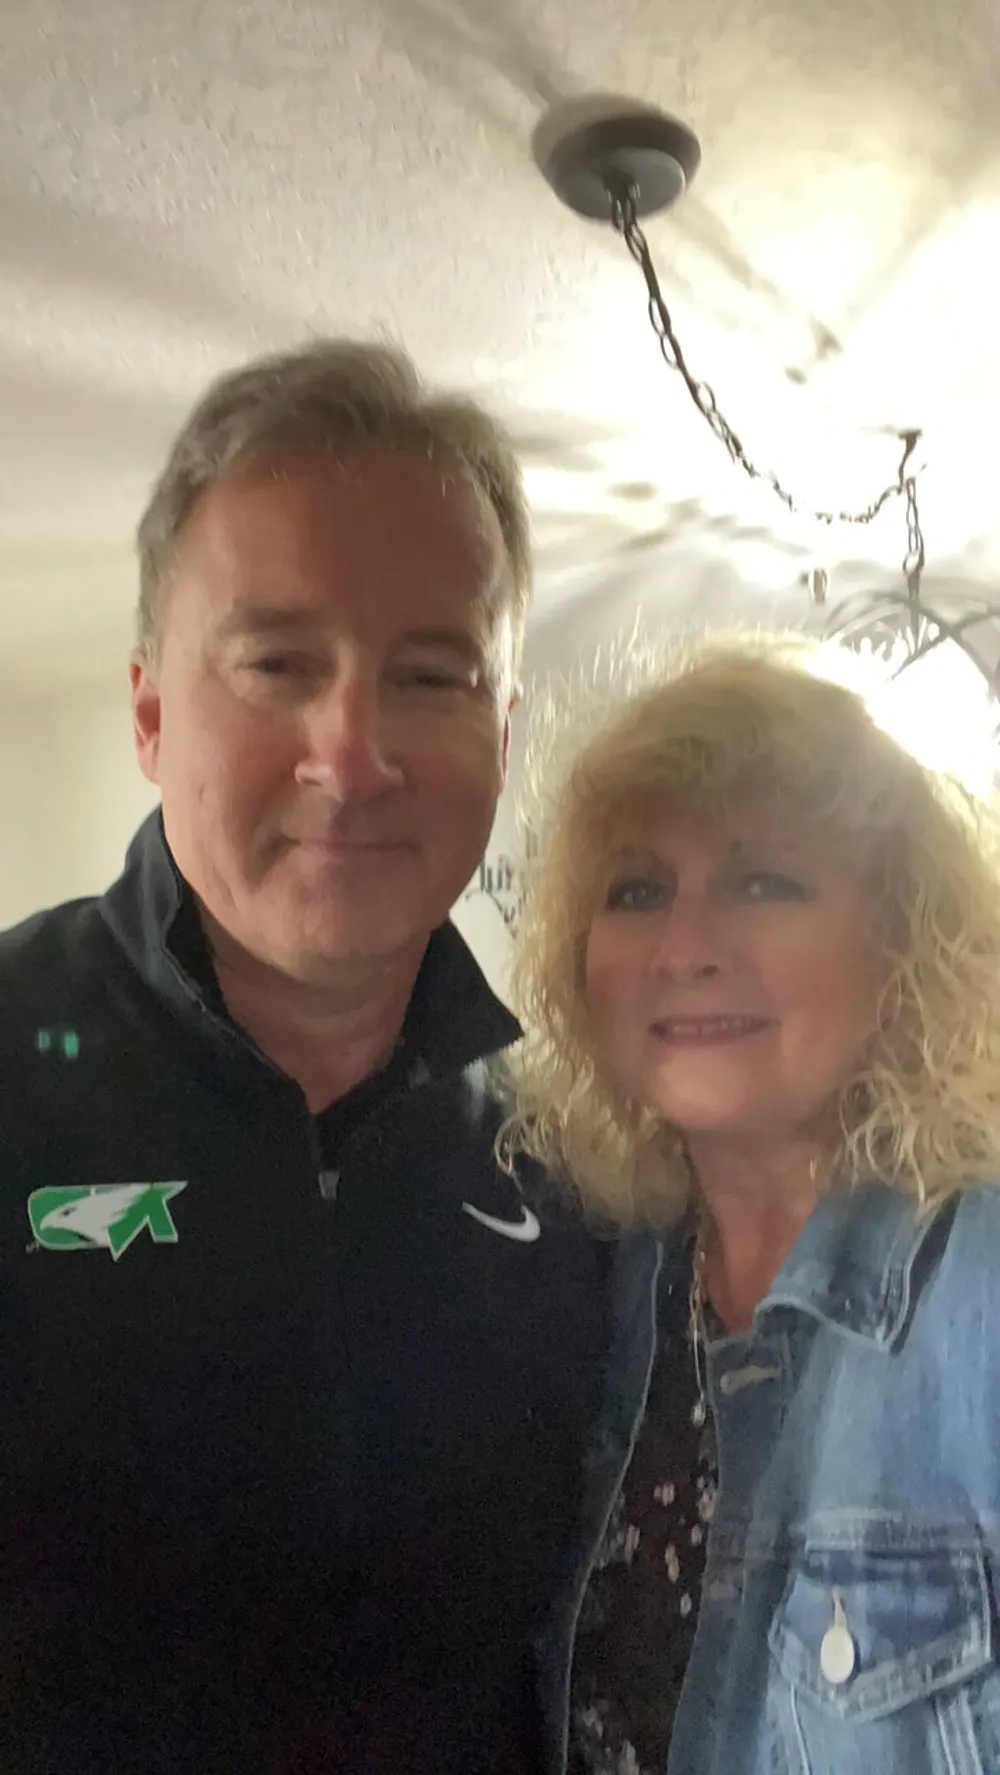 A man and a woman are smiling for a selfie indoors with a light fixture visible in the background